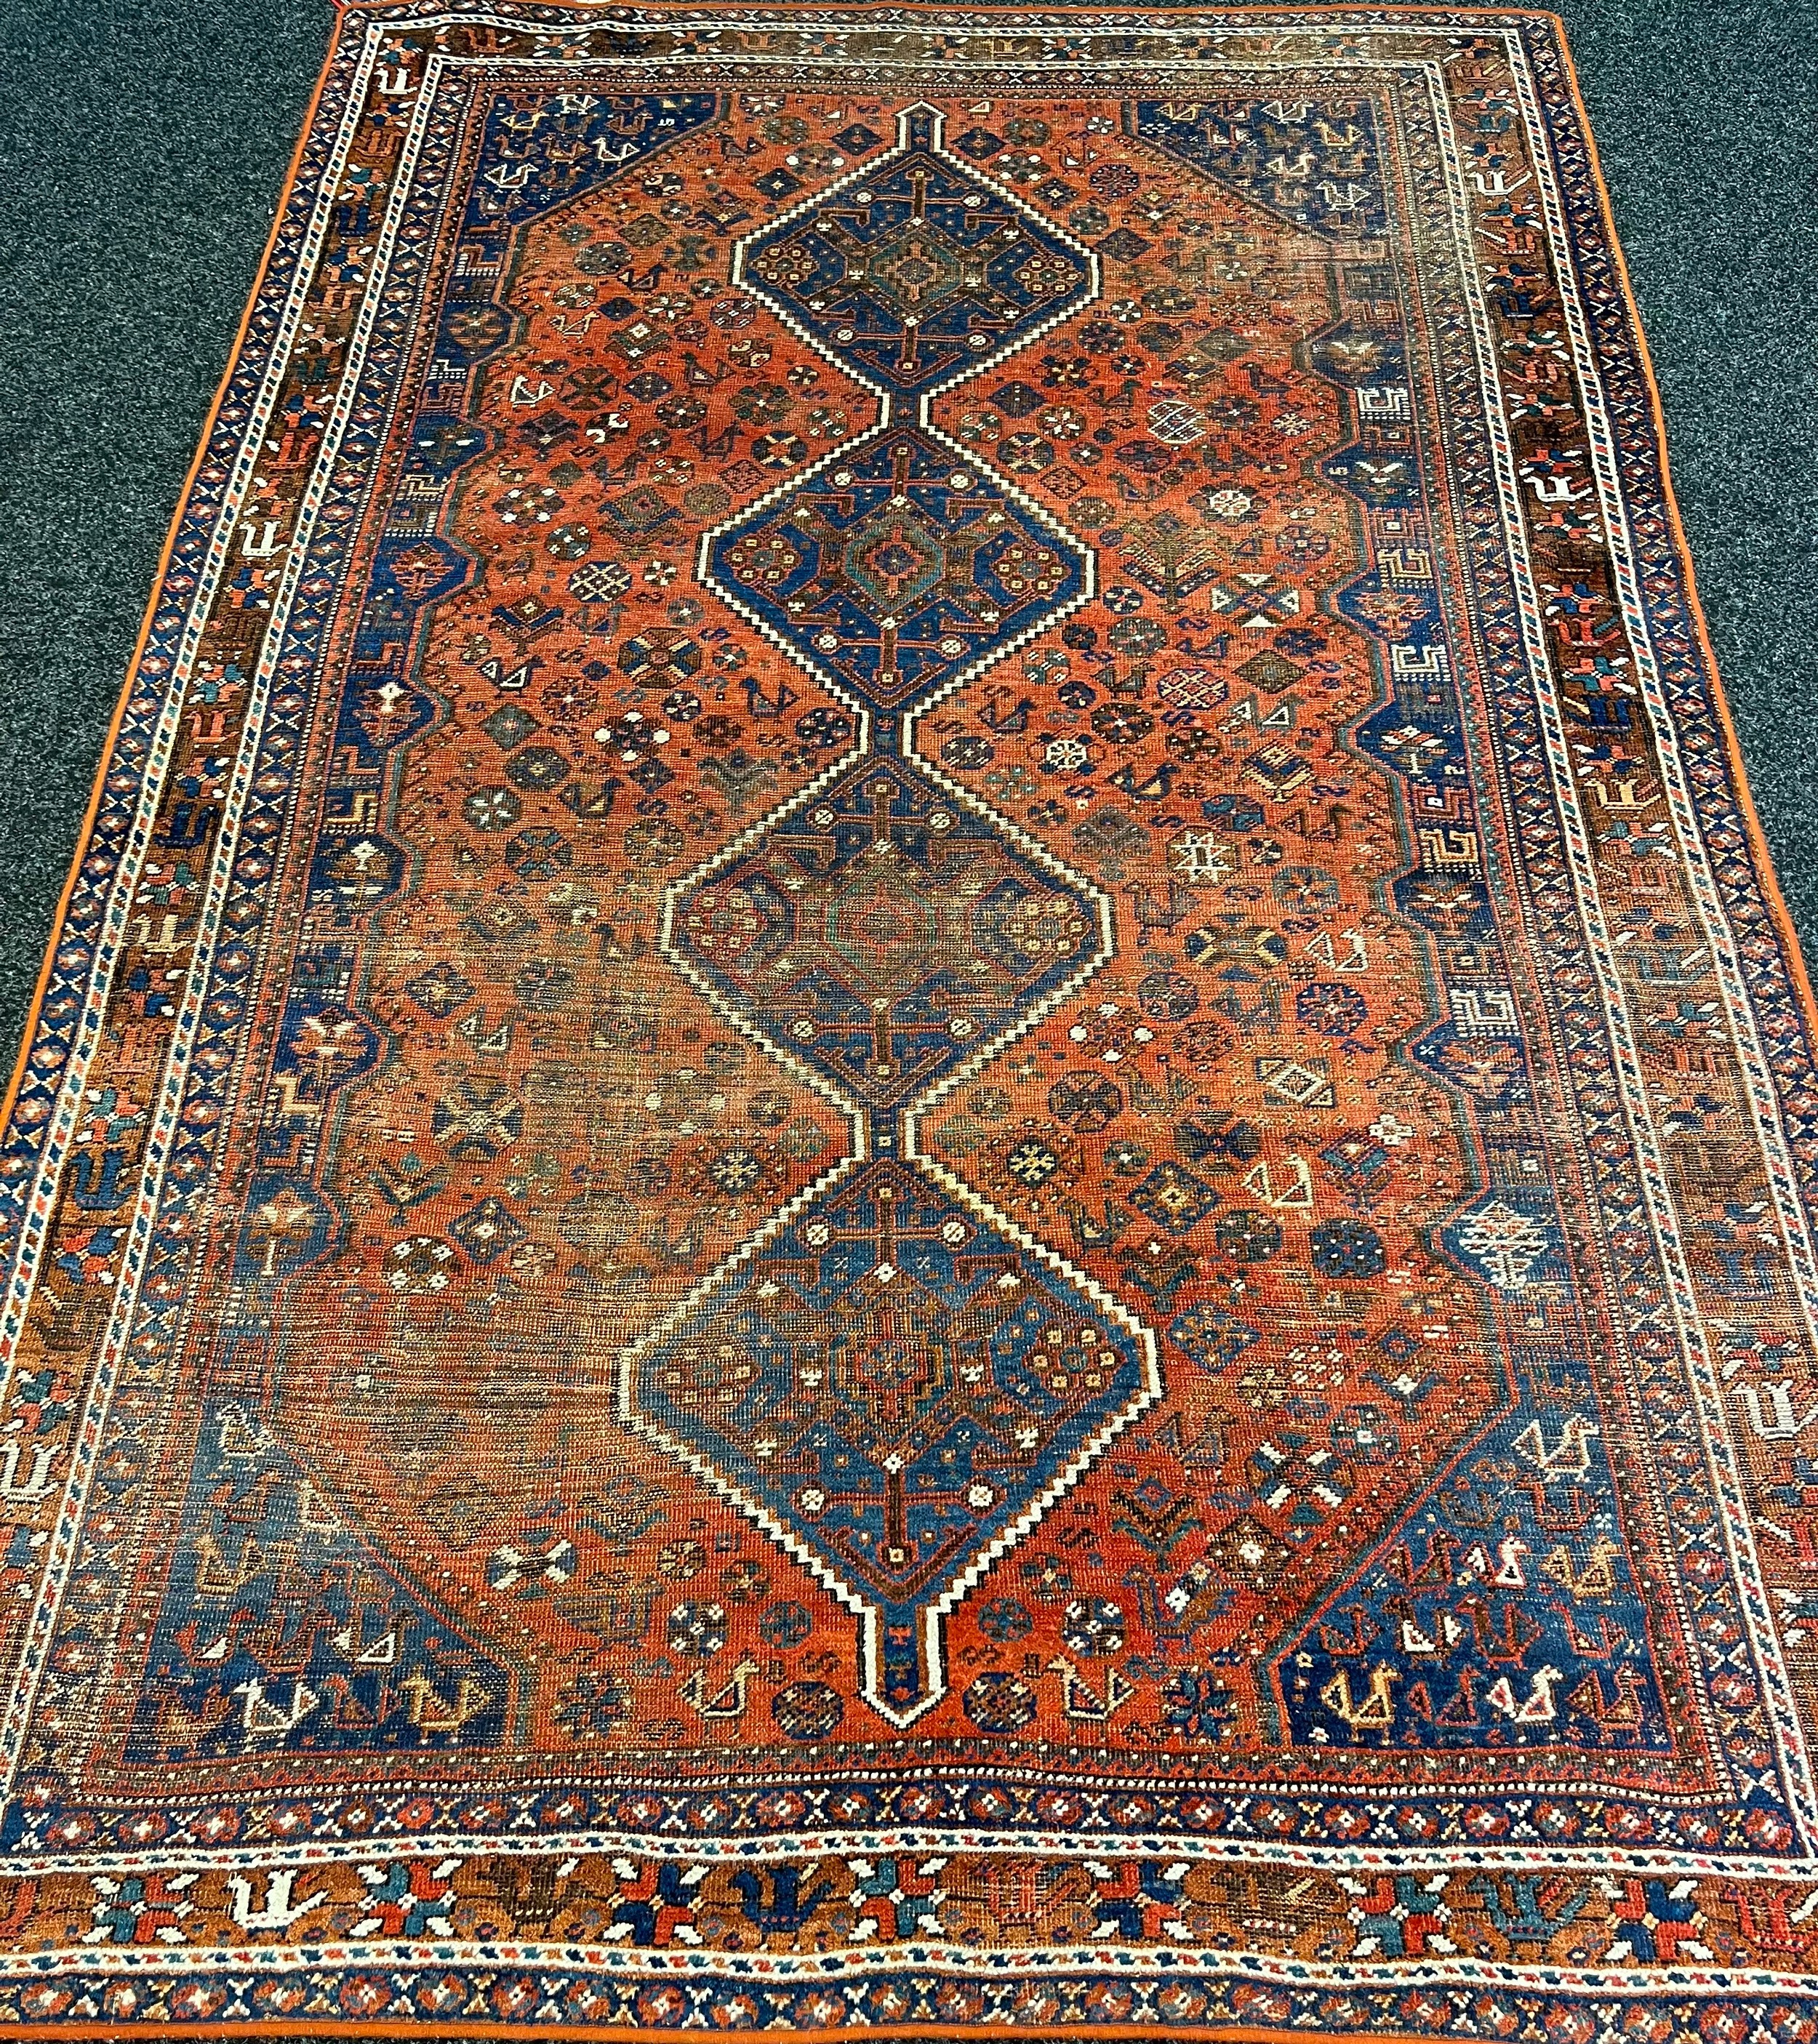 Provinz Gaschgai Iranian rug with certificate of authenticity [200x300cm]